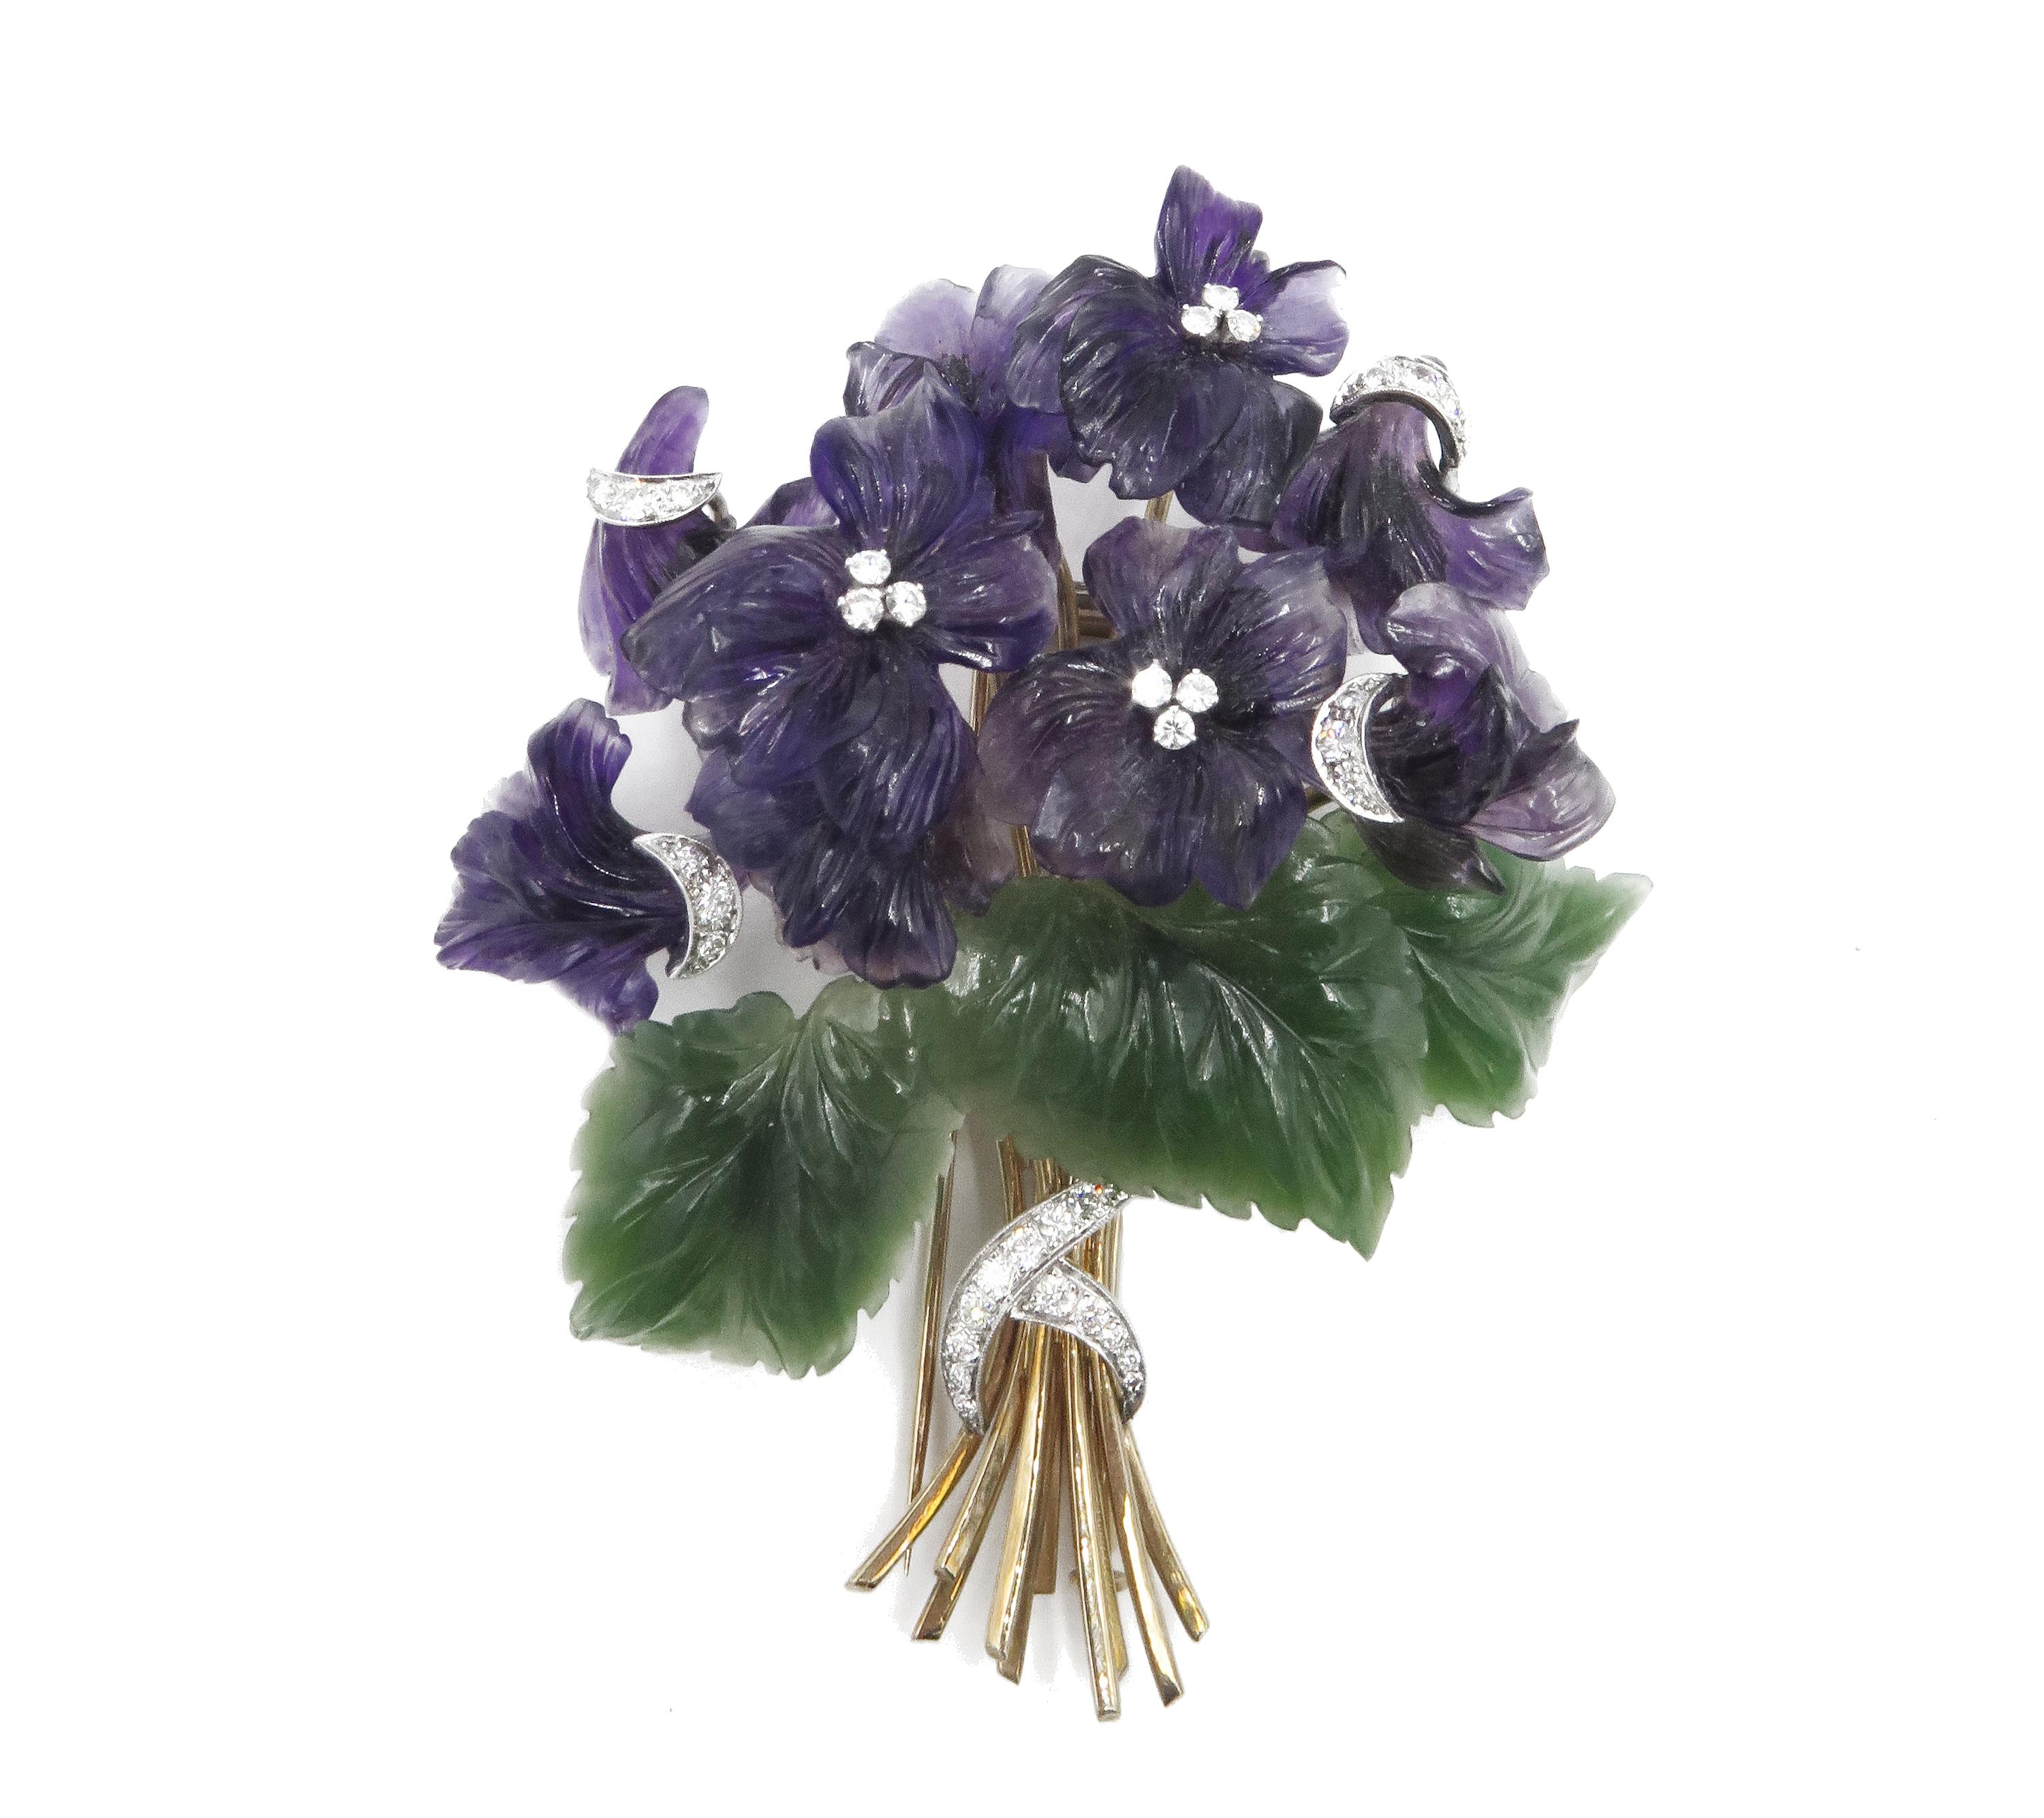 An Elegant set of bouquets comprised of carved Amethyst violet flowers accented with diamonds. Set in white gold, arranged with beautifully carved Nephrite leaves supported on yellow gold stems all tied together with a sparkling diamond ribbon. What